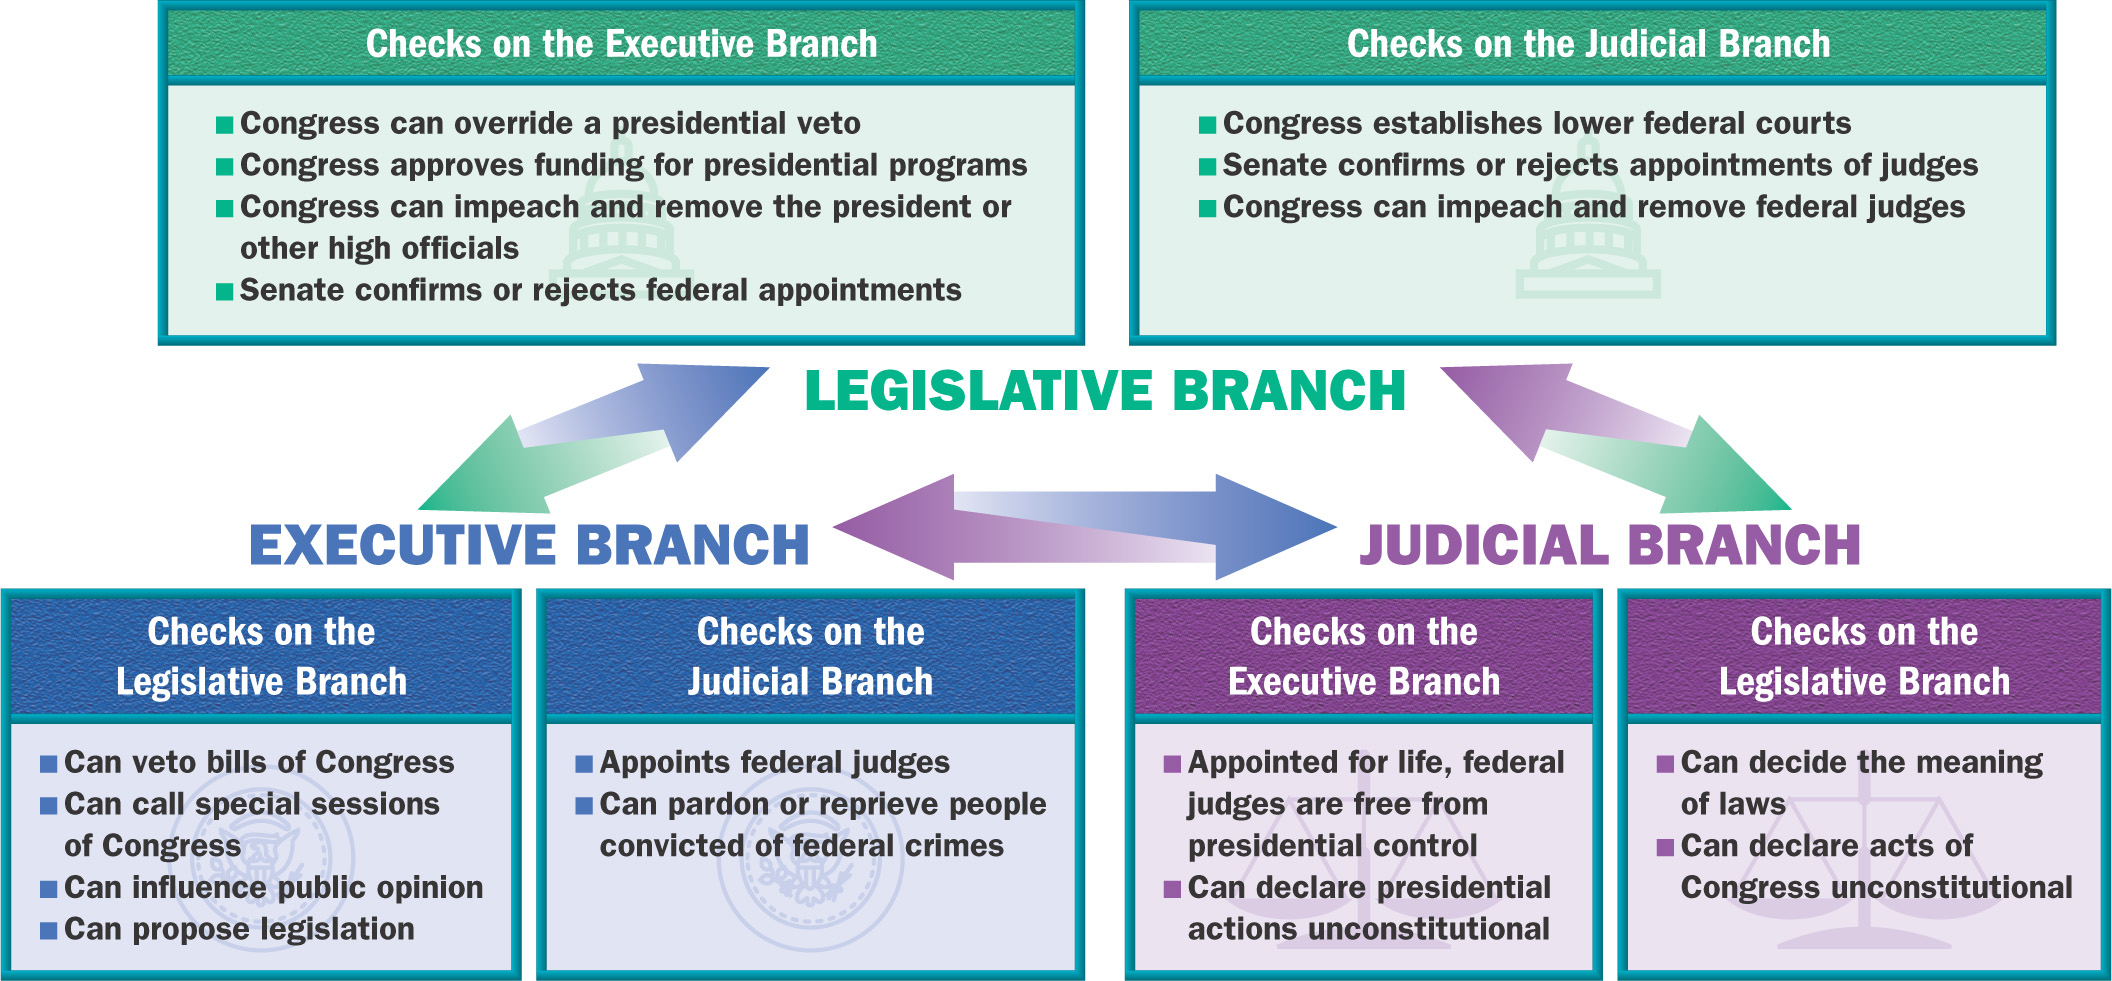 A chart shows the checks on each of the branches of
government.